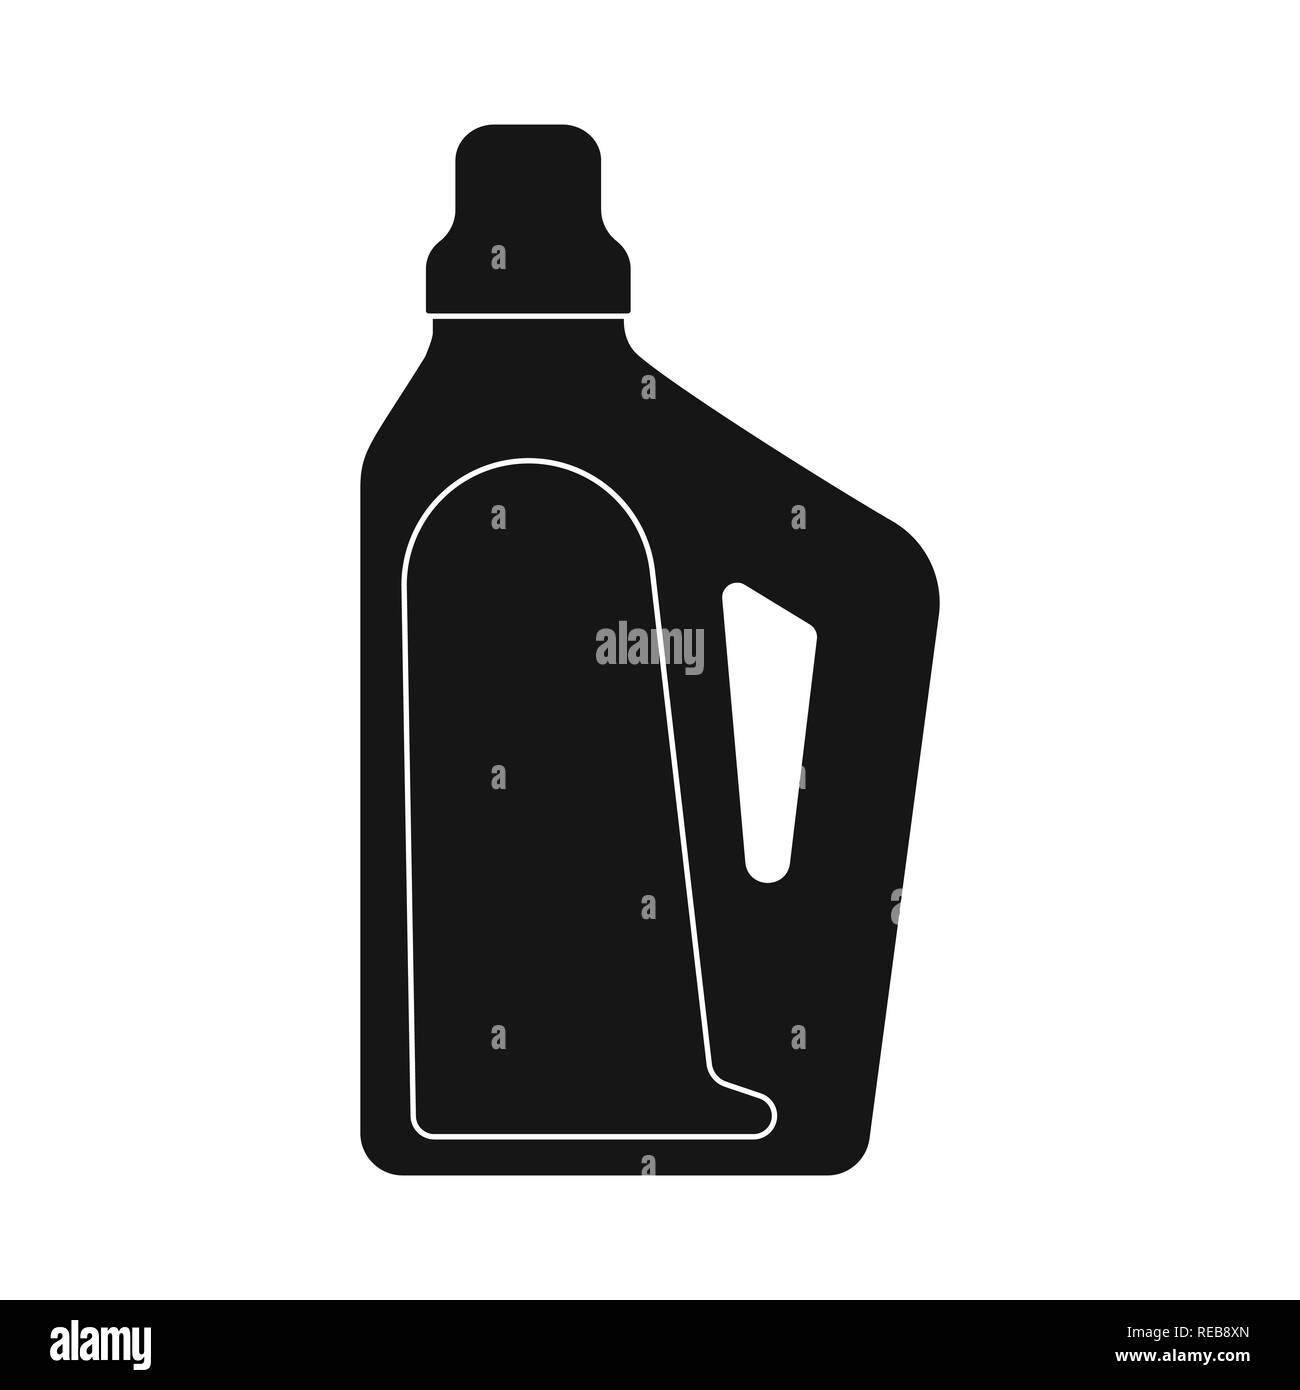 household,chemicals,organic,bottle,plastic,label,capacity,storage,container,packaging,sugarcane,cane,sugar,field,plant,plantation,farm,agriculture,sucrose,technology,set,vector,icon,illustration,isolated,collection,design,element,graphic,sign,black,simple, Vector Vectors , Stock Vector